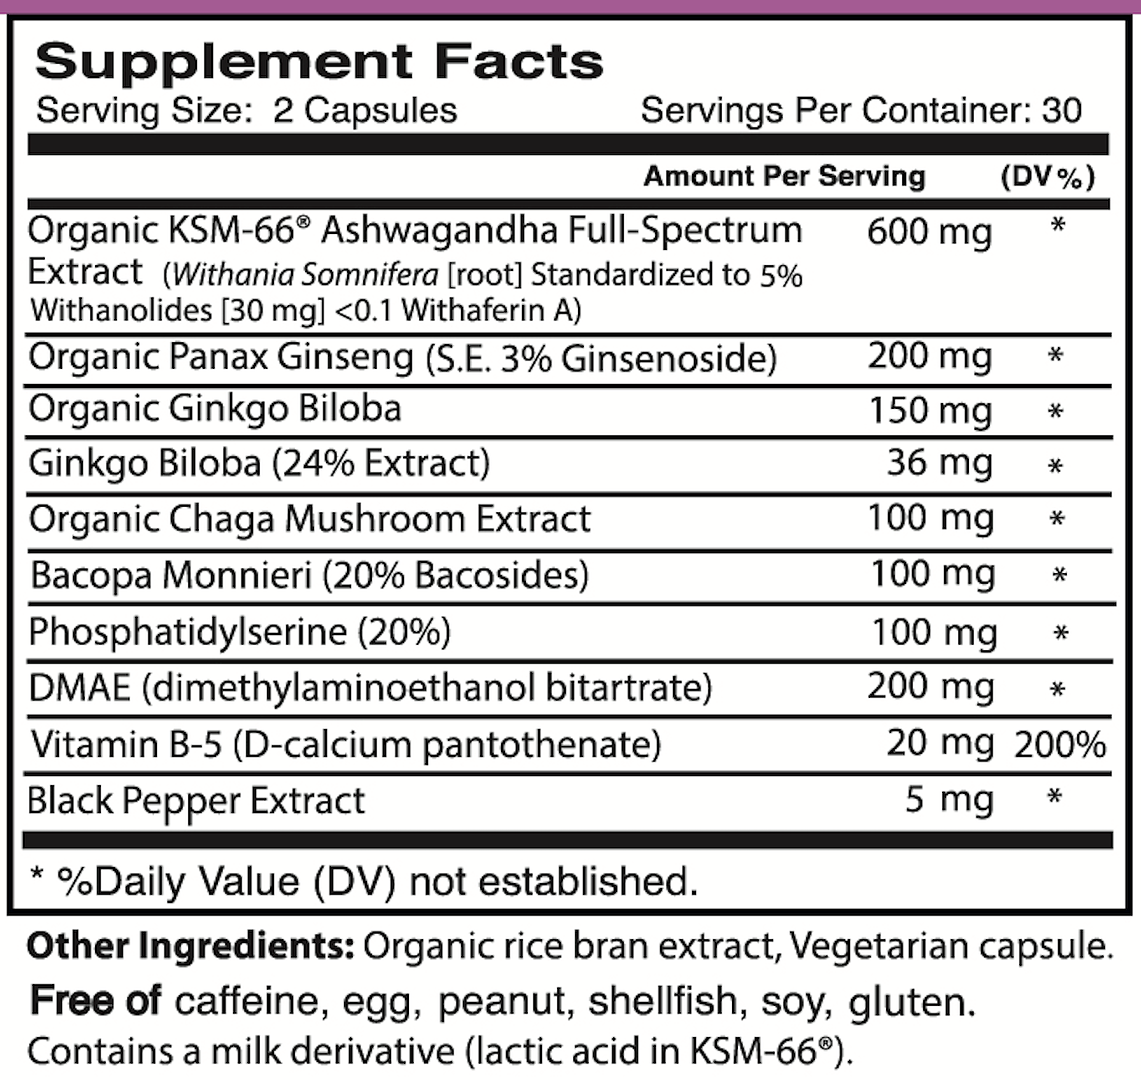 INGREDIENTS SHAPE ORGANICS BODY MIND BOOST Supports Cognitive Function, Added Attention, Memory, Concentration, Focus, Energy, Physical Stamina, endurance, positive mood, anti-stress, with KSM66, 